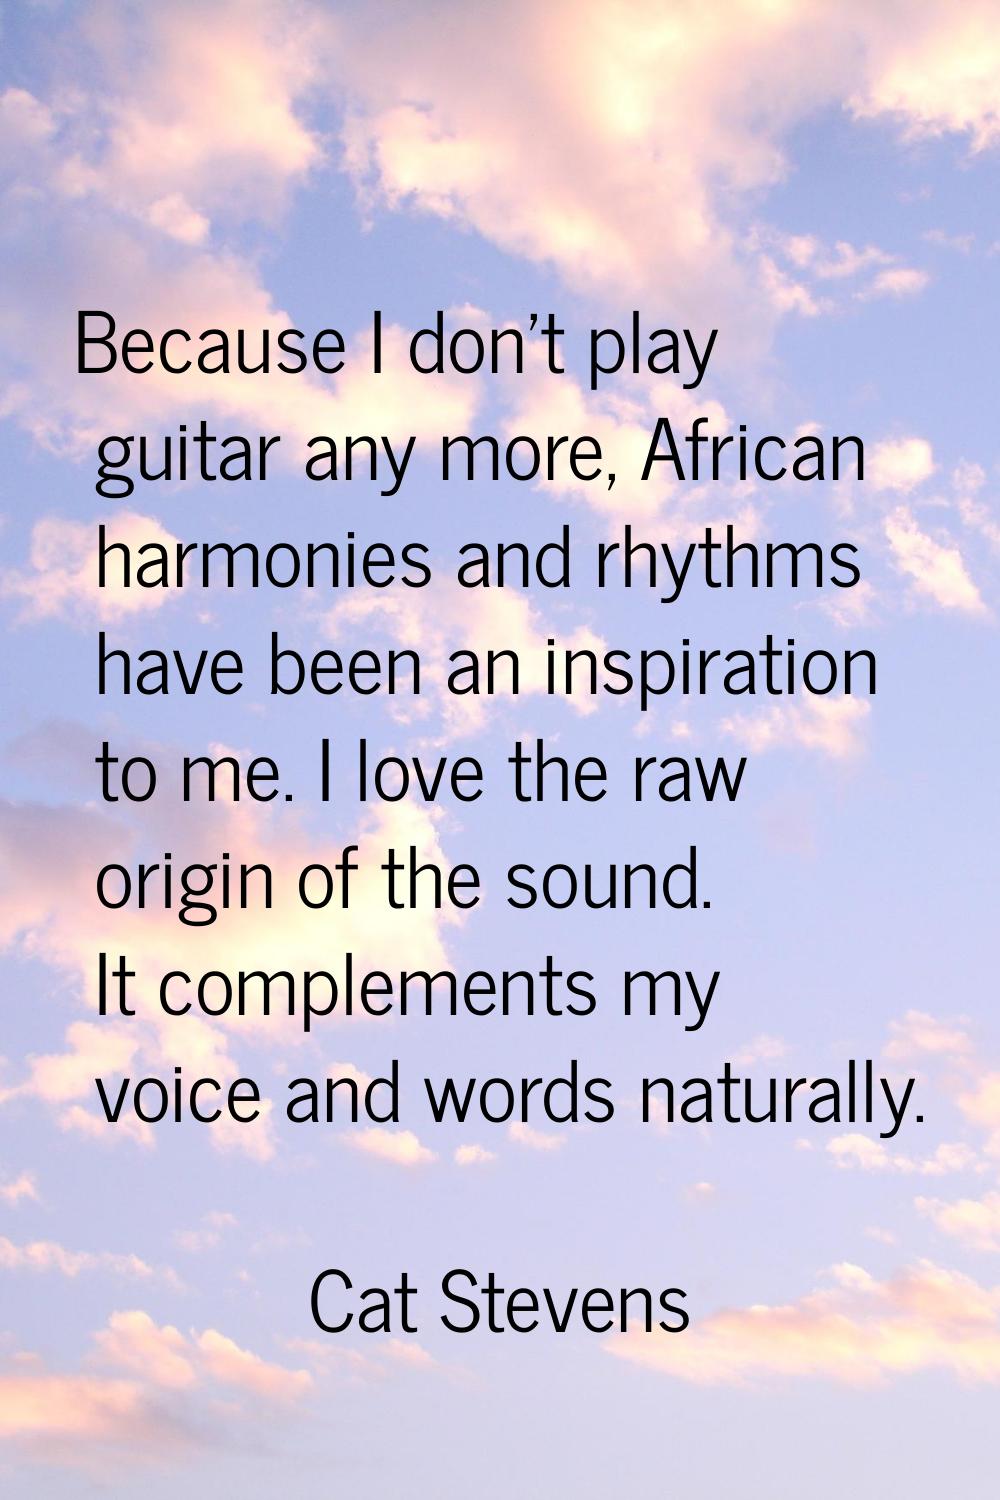 Because I don't play guitar any more, African harmonies and rhythms have been an inspiration to me.